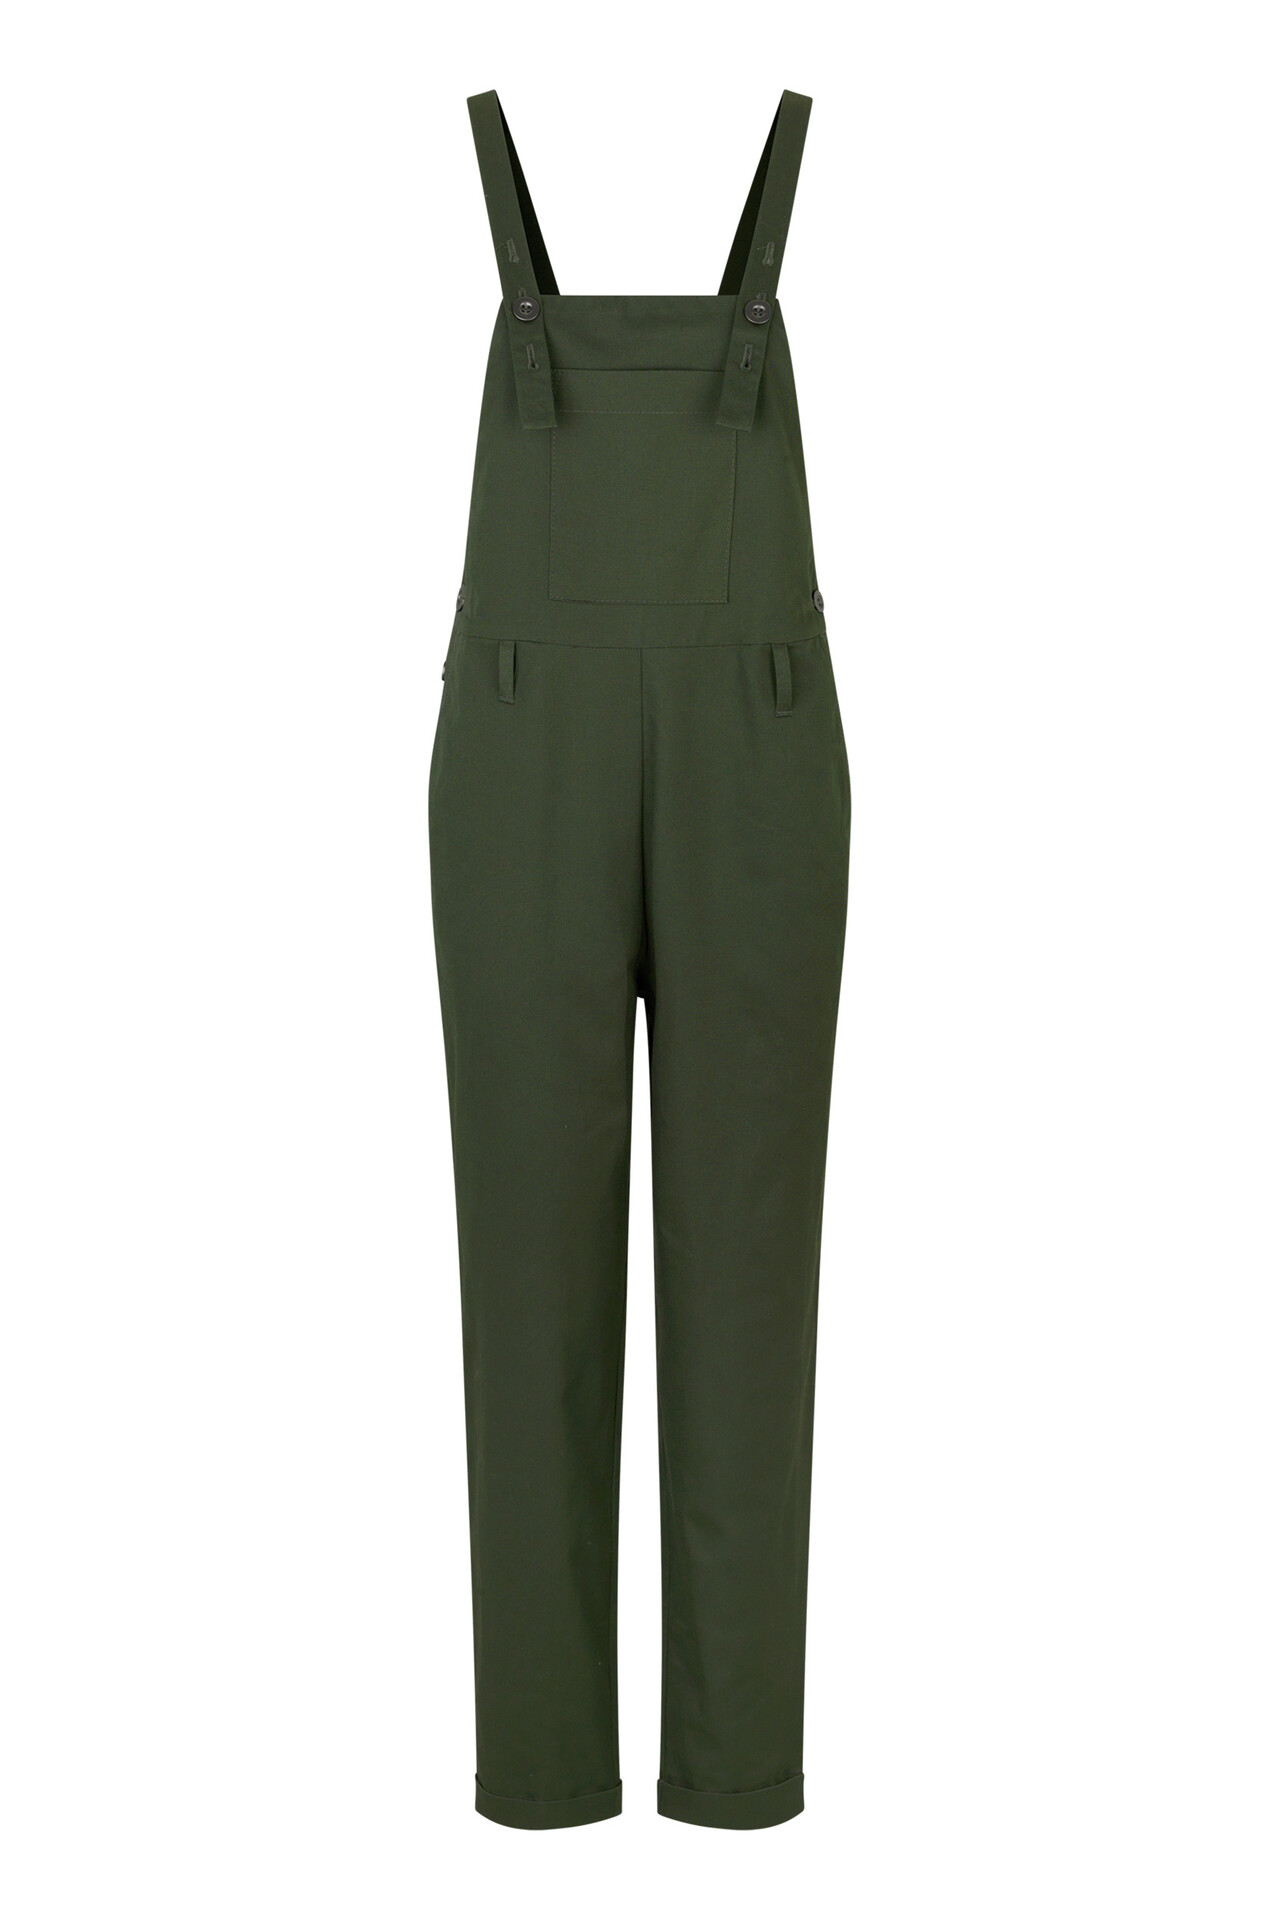 CRÉTON Worker overalls (ARMY GRØN 40)